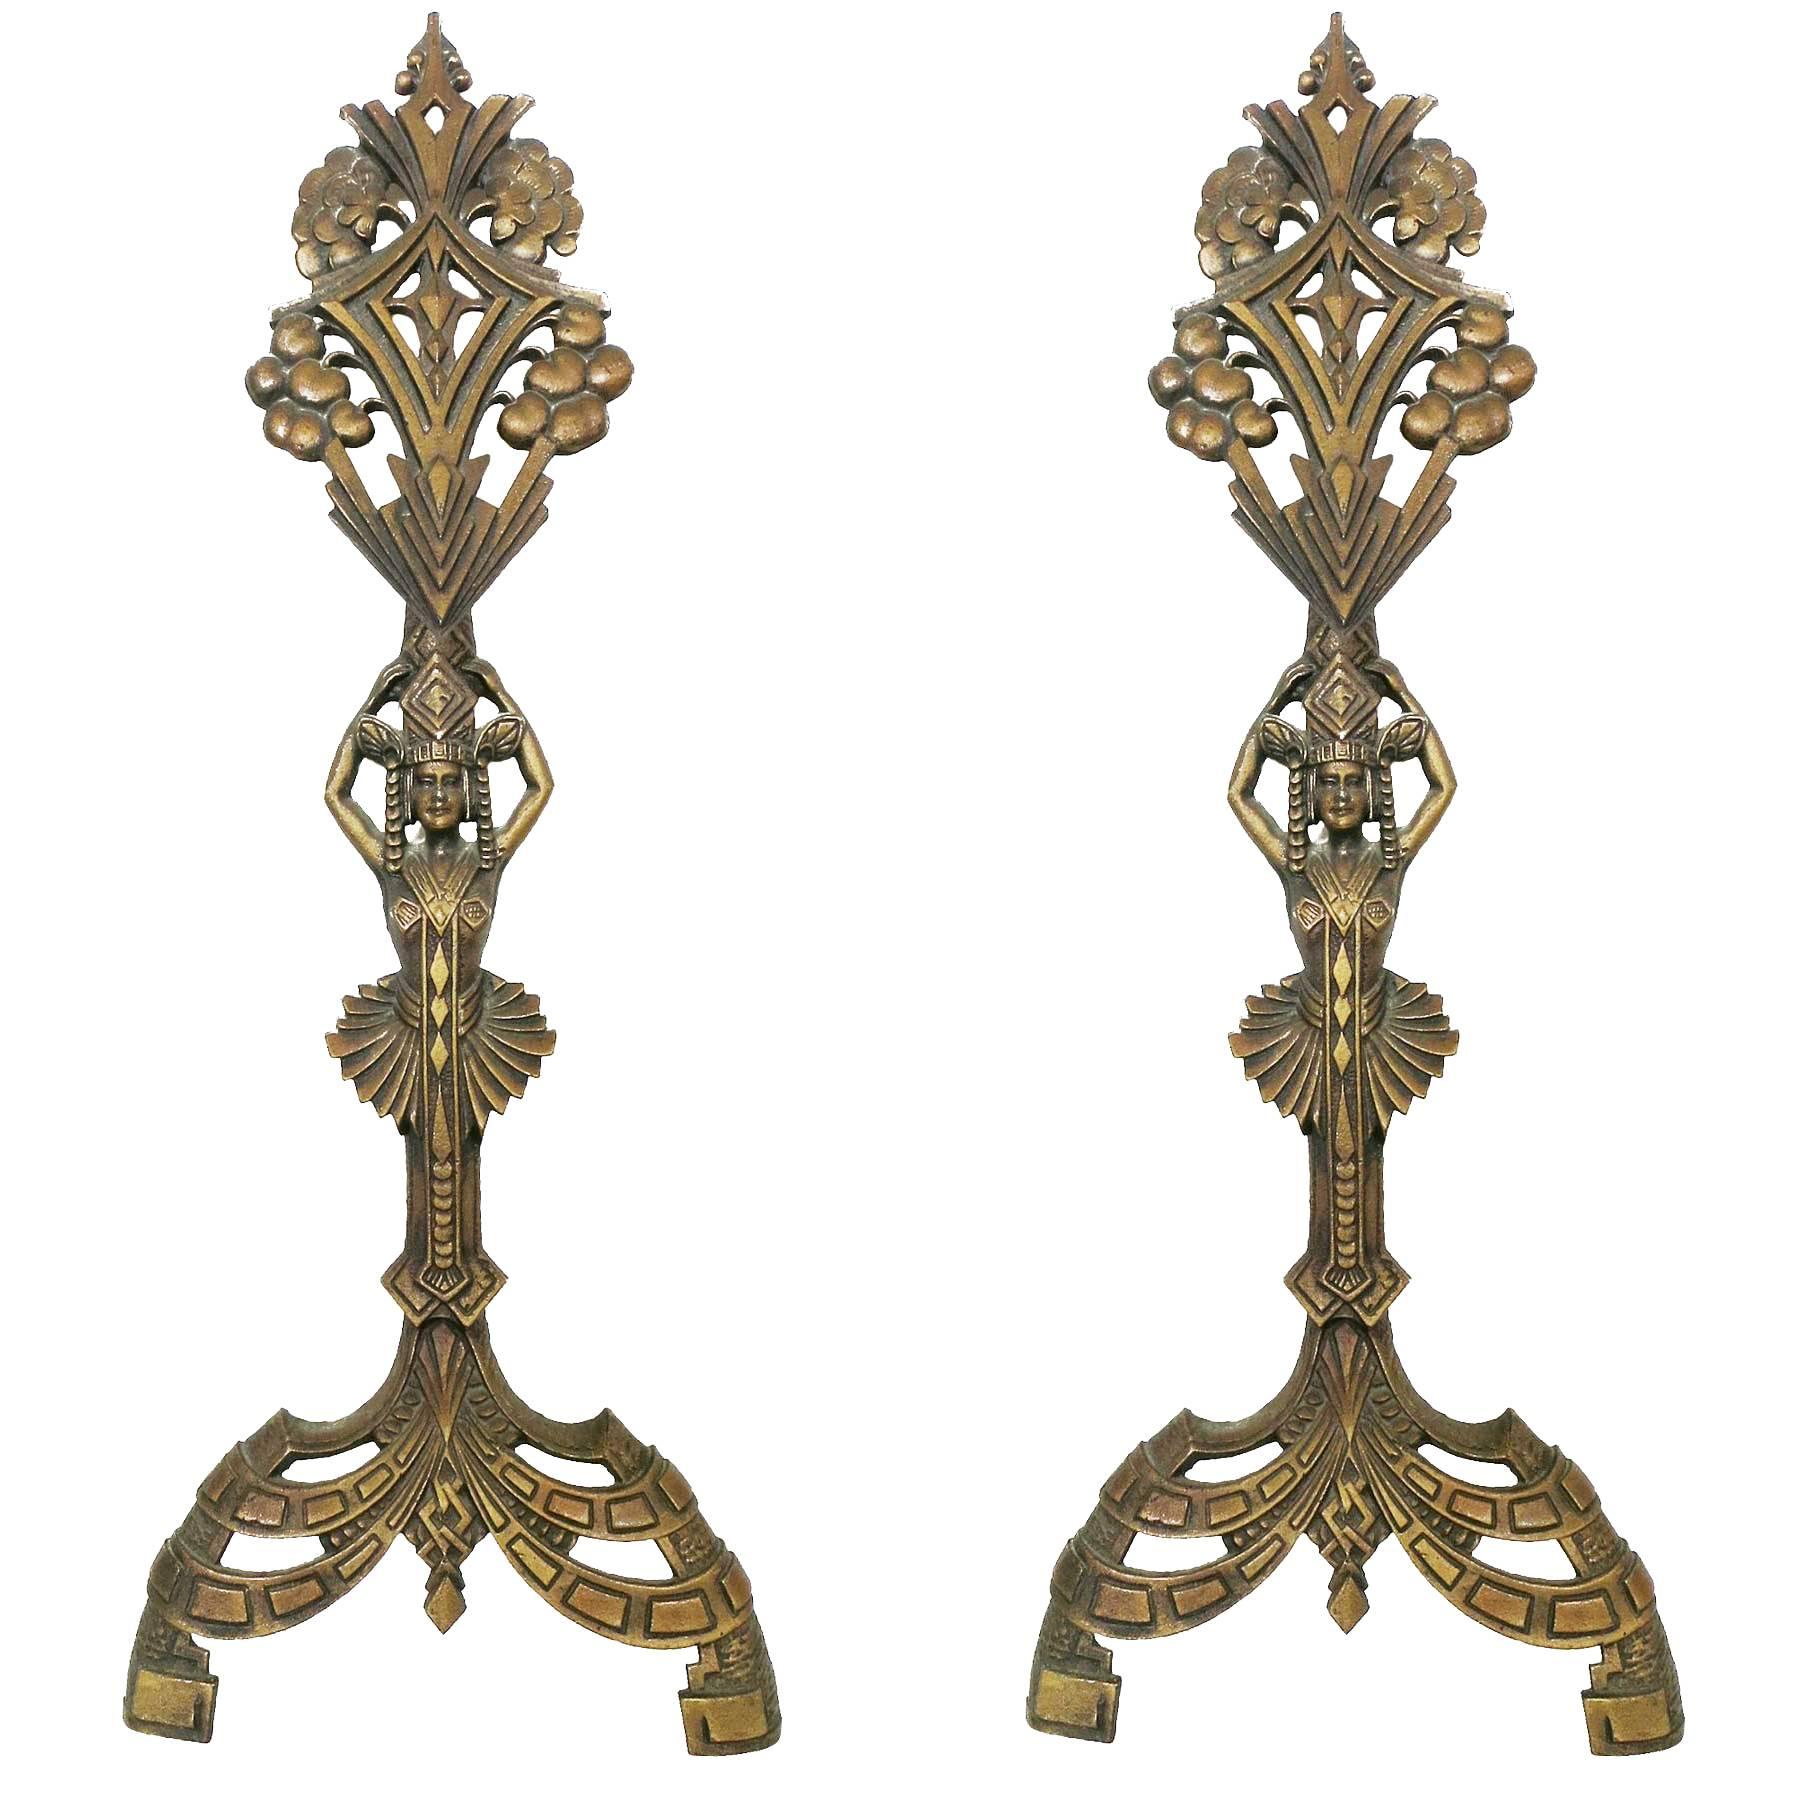 Egyptian Revival Art Deco Fireplace Andirons by Universal Electric Log Co